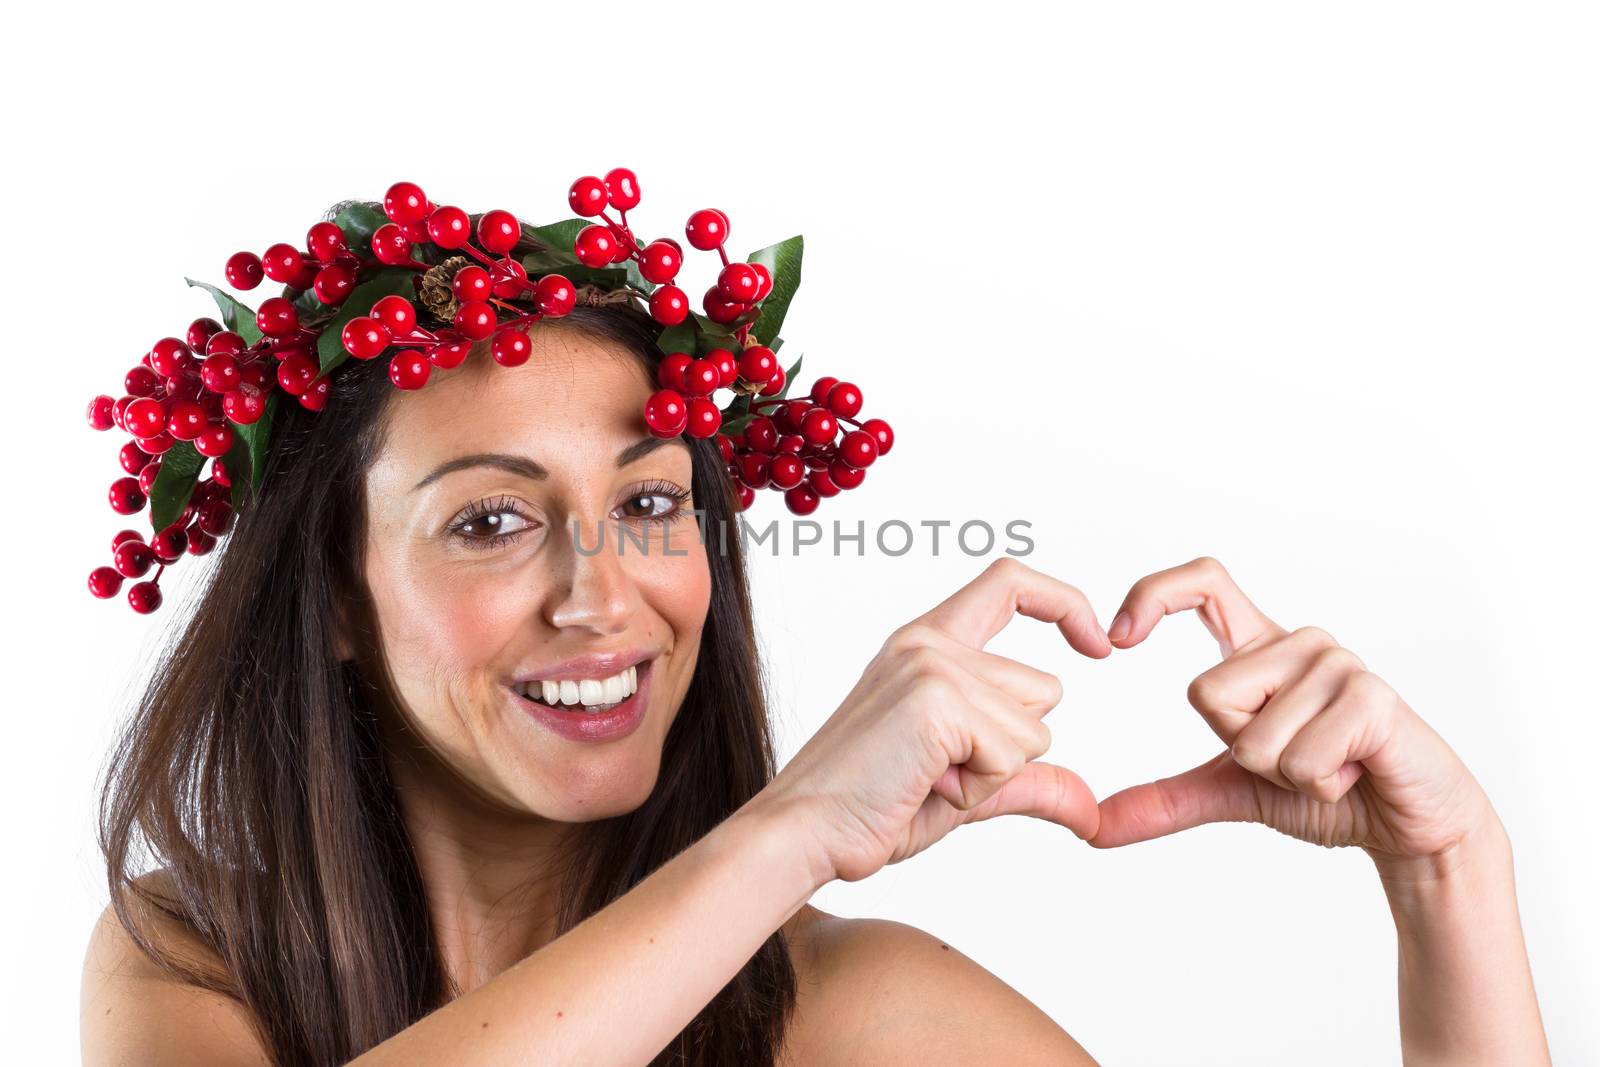 Christmas or New Year beauty woman portrait isolated on white background. Smiling young woman with wearing a Christmas wreath on her head making a heart with her hands. Natural makeup.